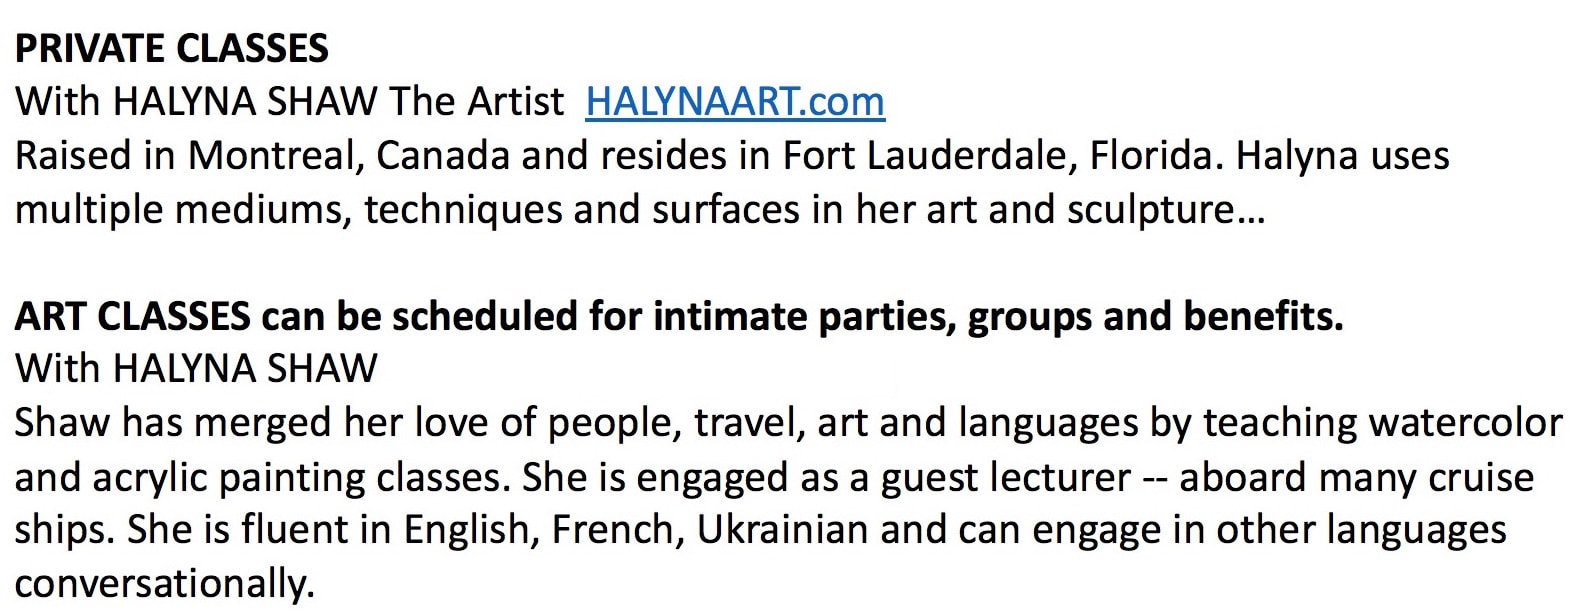 About the artist Halyna Shaw